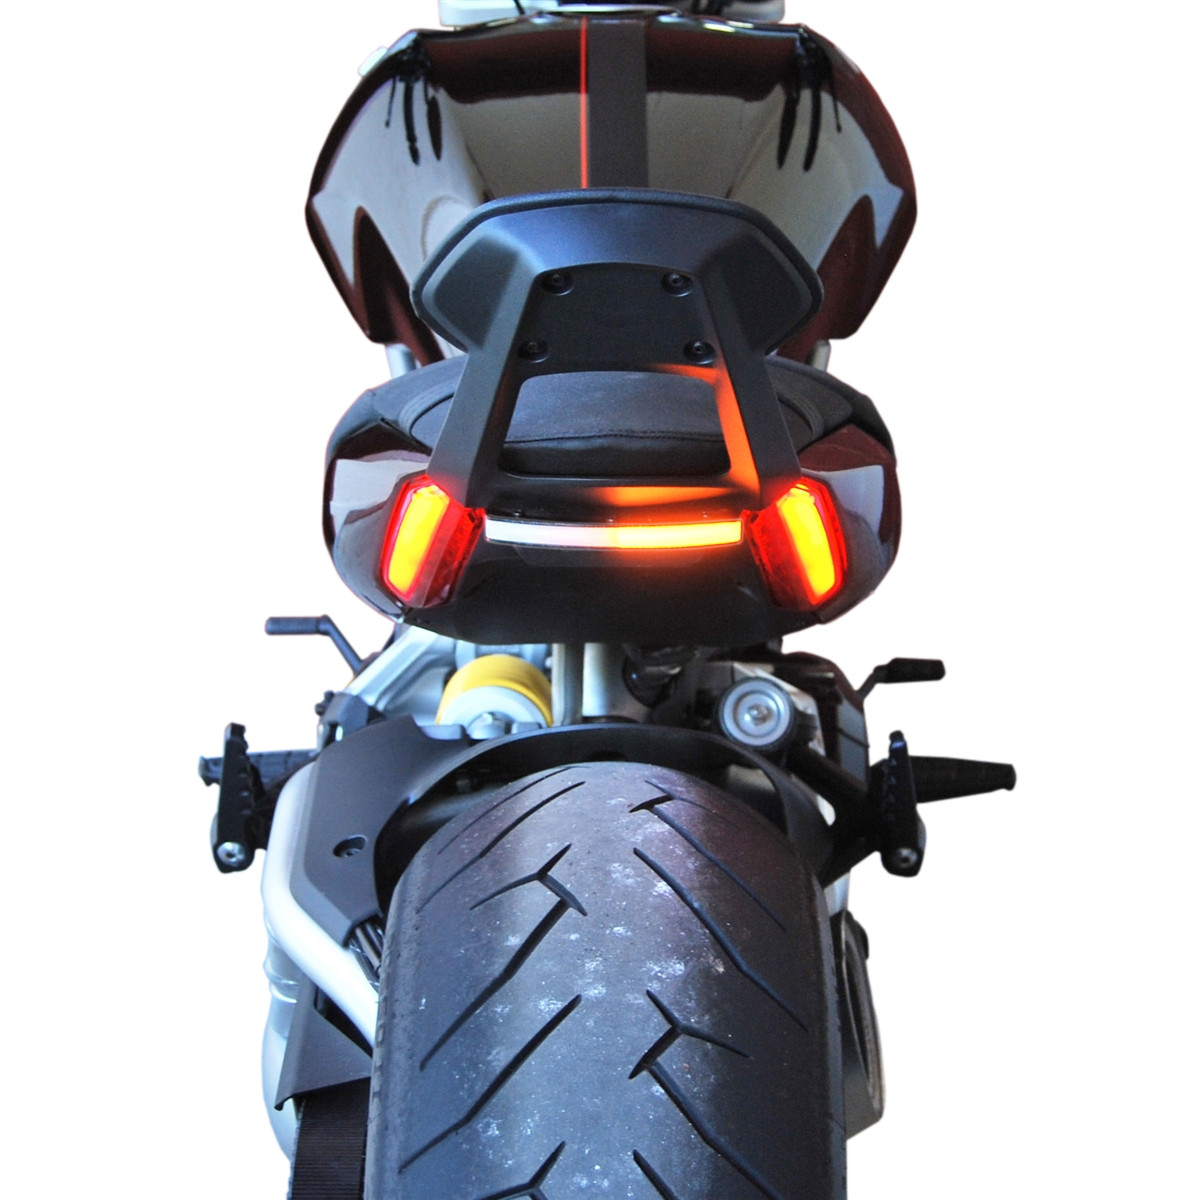 LED Rear Turn Signals - Ducati xDiavel - Click Image to Close